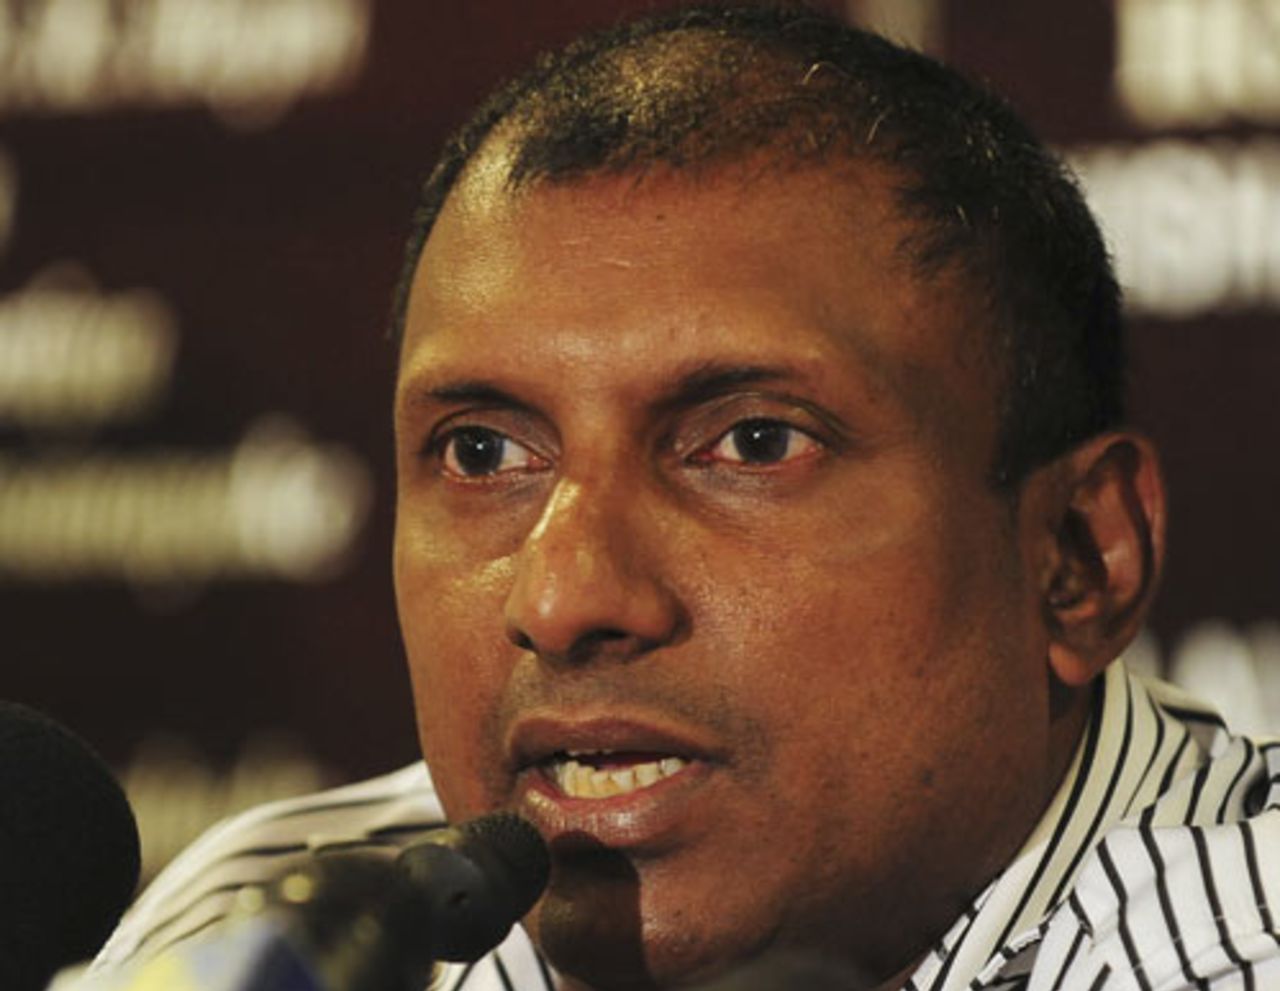 Aravinda de Silva at a press conference about the team chosen for the Asia Cup, Colombo, June 10, 2010